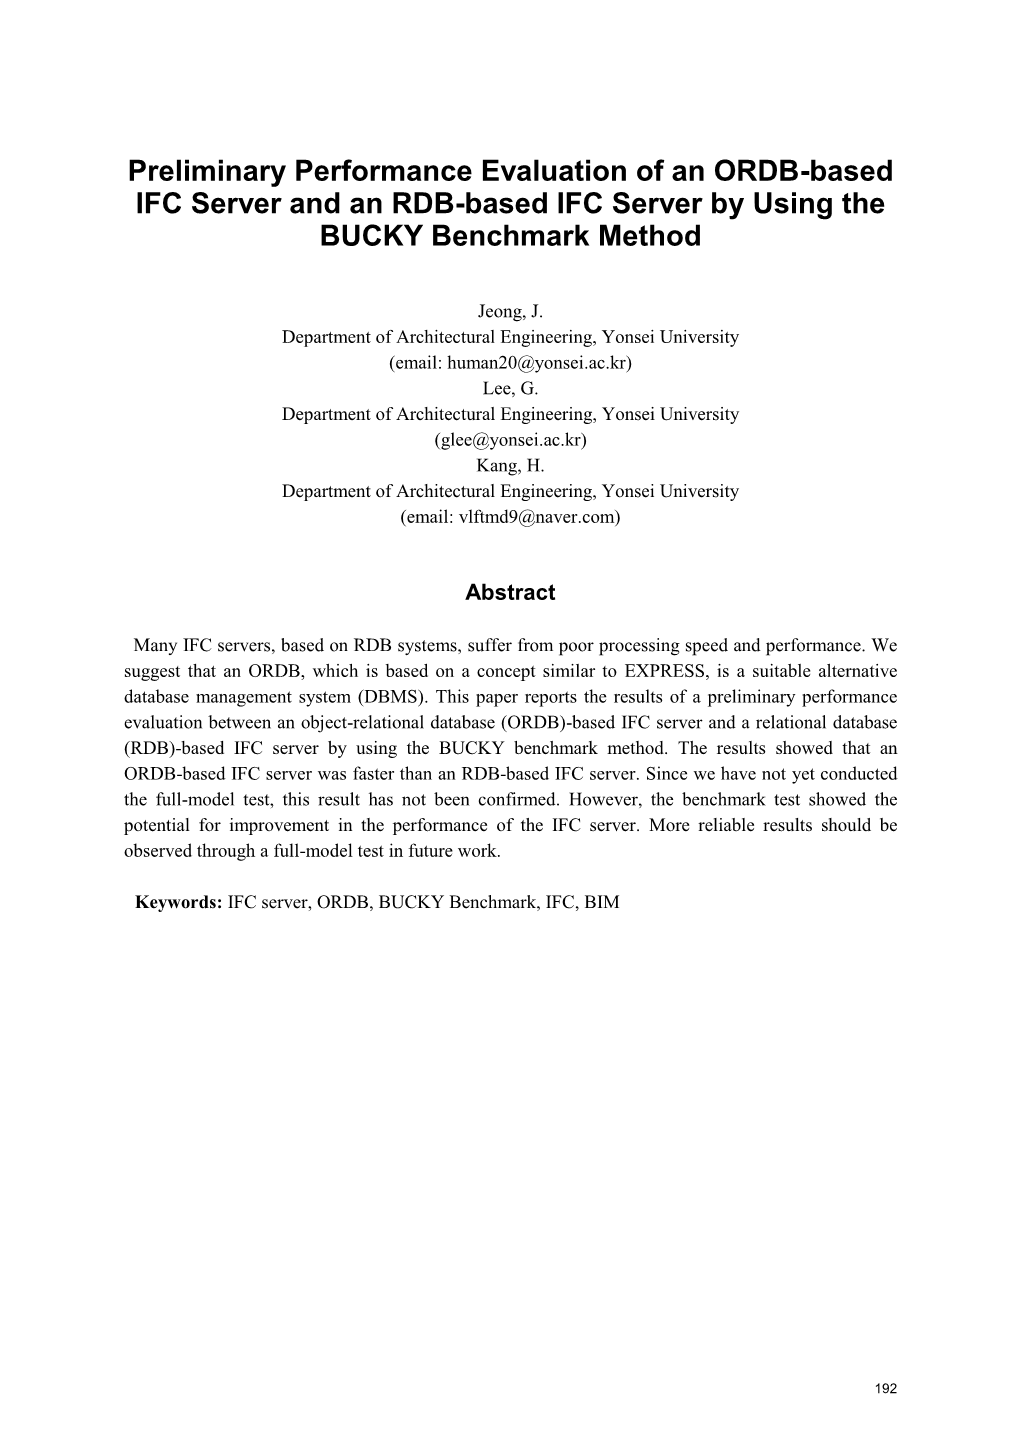 Preliminary Performance Evaluation of an ORDB-Based IFC Server and an RDB-Based IFC Server by Using the BUCKY Benchmark Method